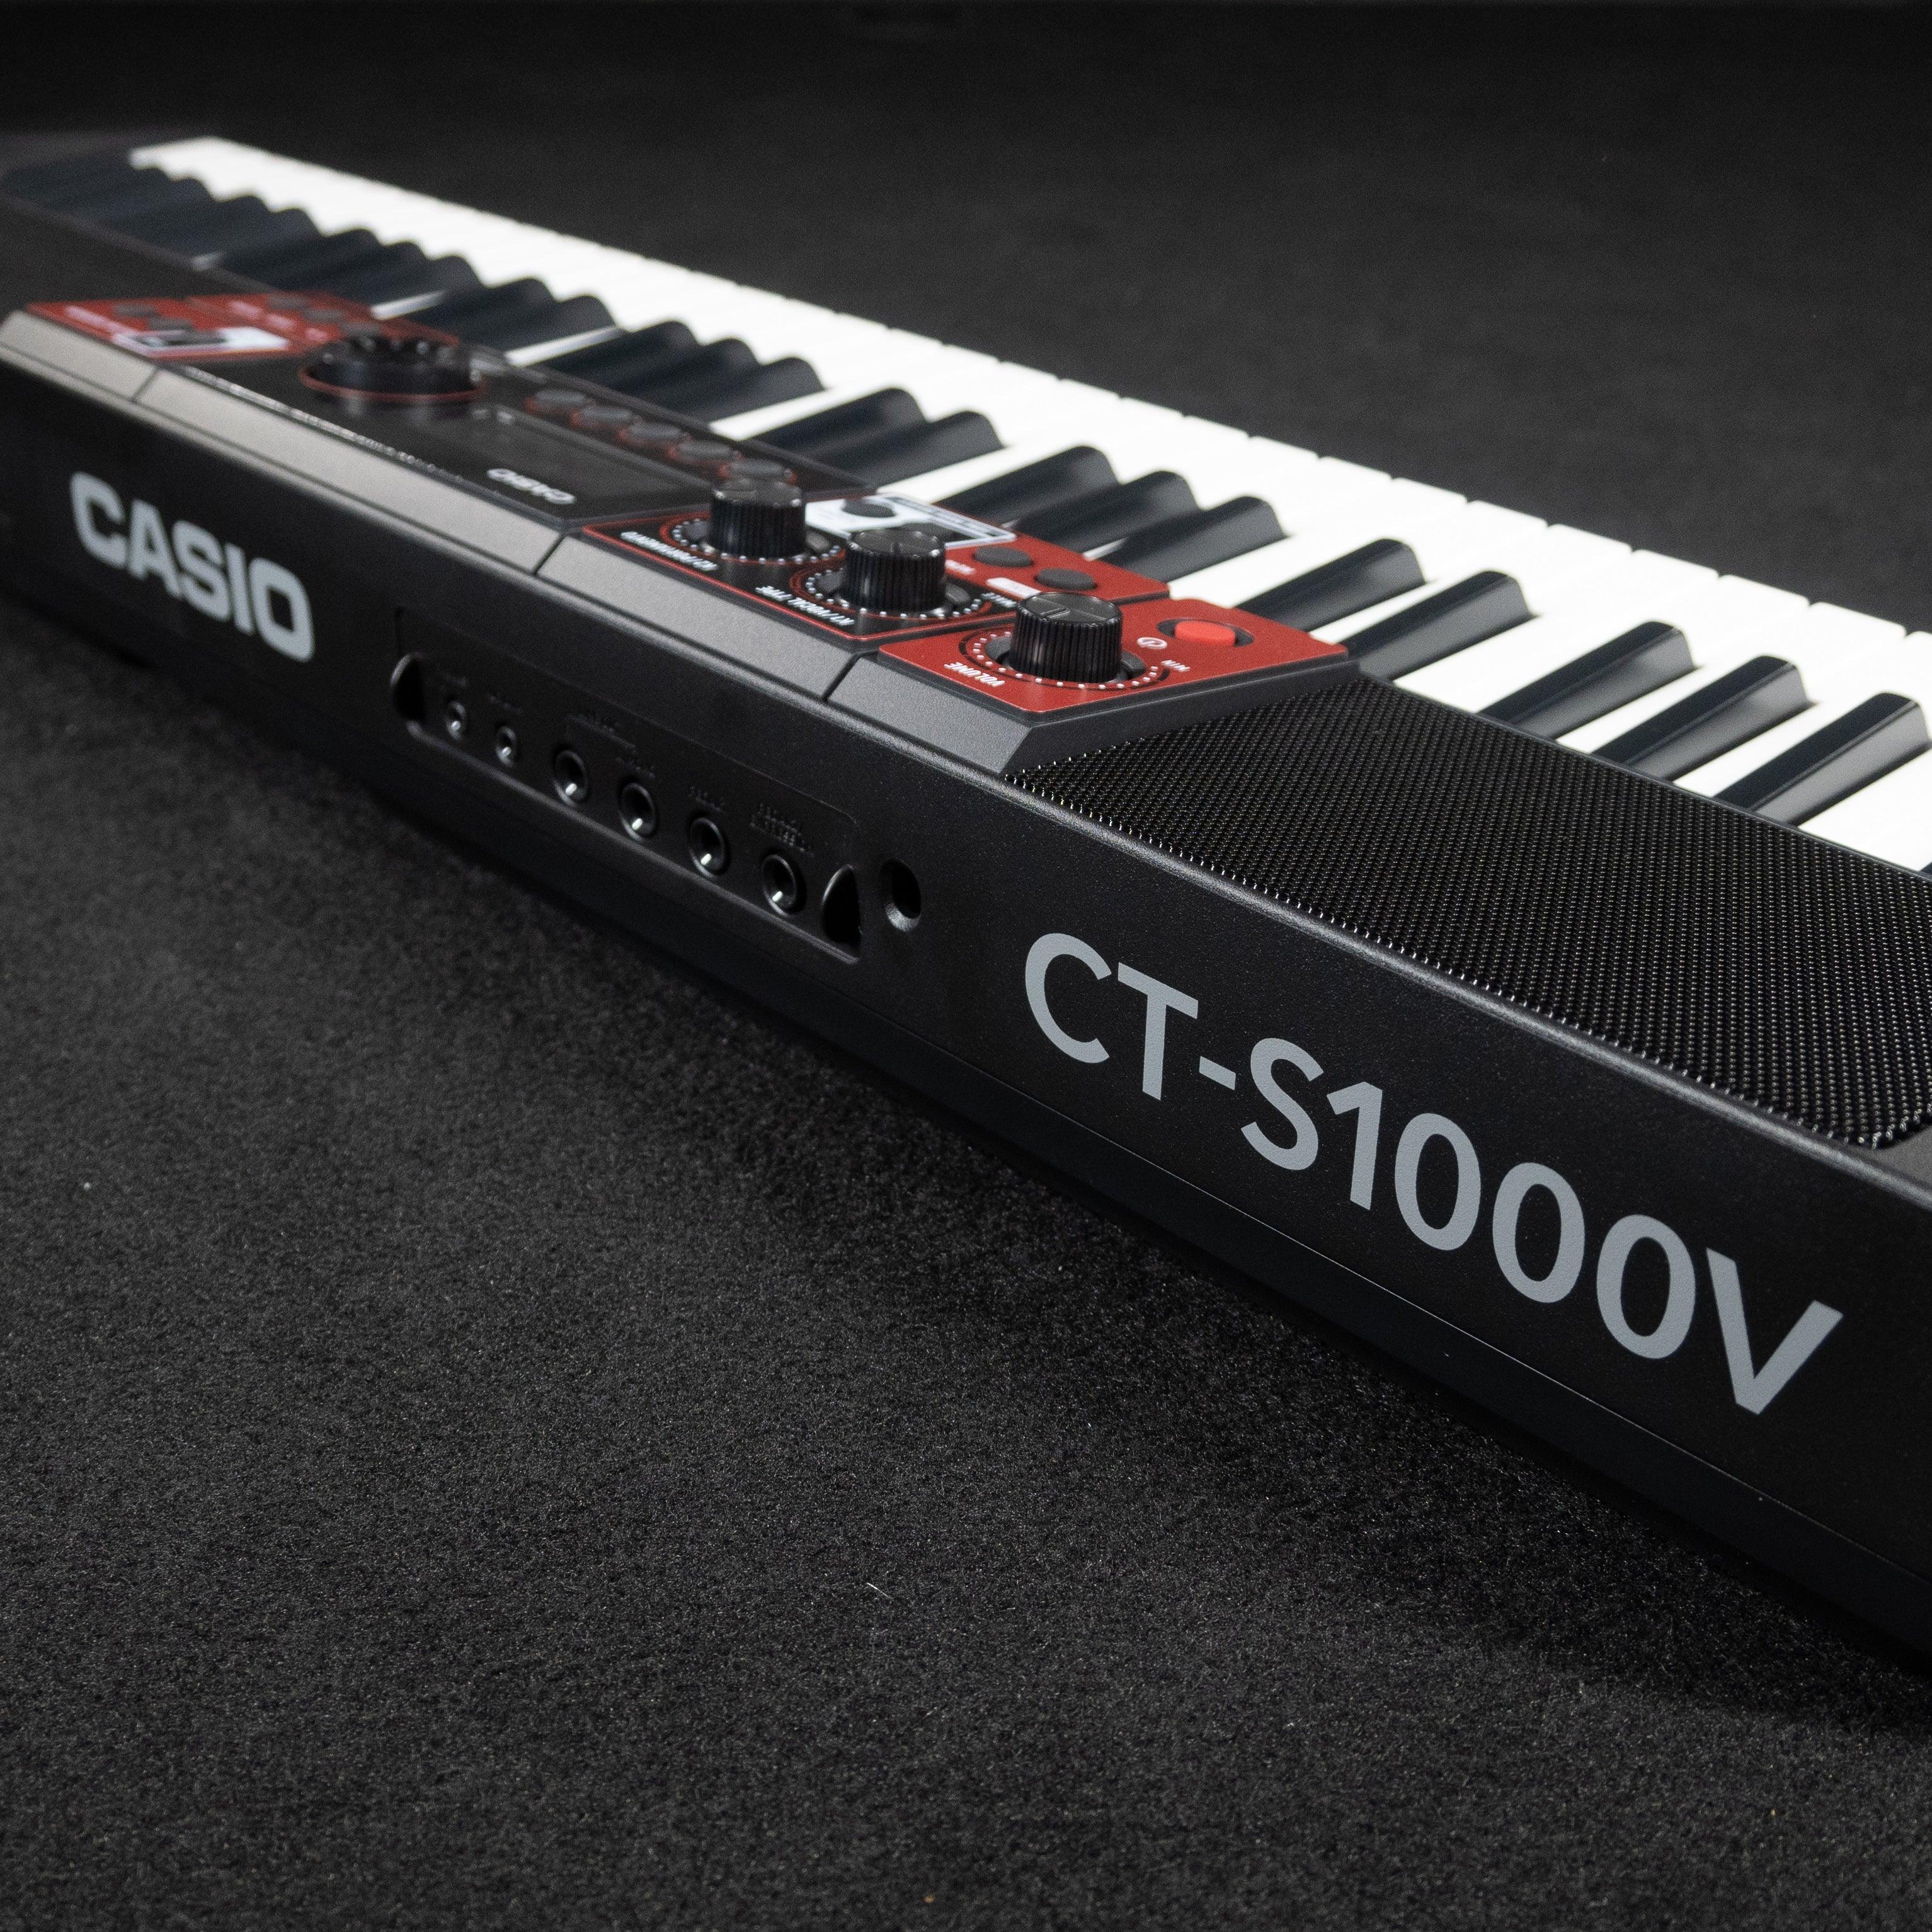 Casio CT-S1000v: Is This The Funnest Synth? 